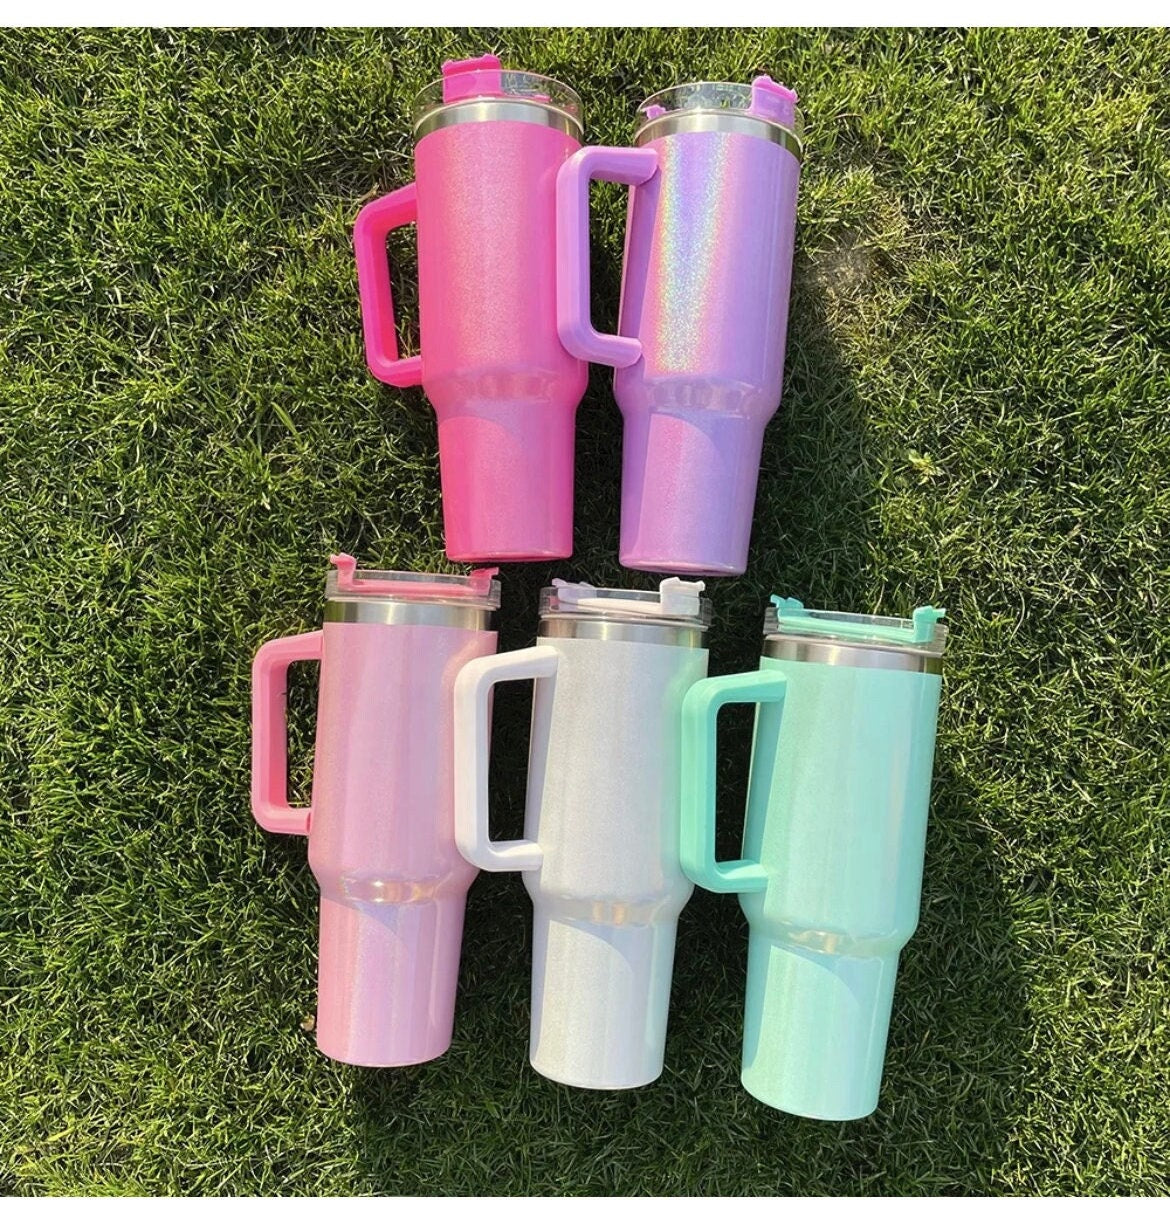 Don’t be a Cunt, 40oz Shimmer Tumbler w/handle and straw